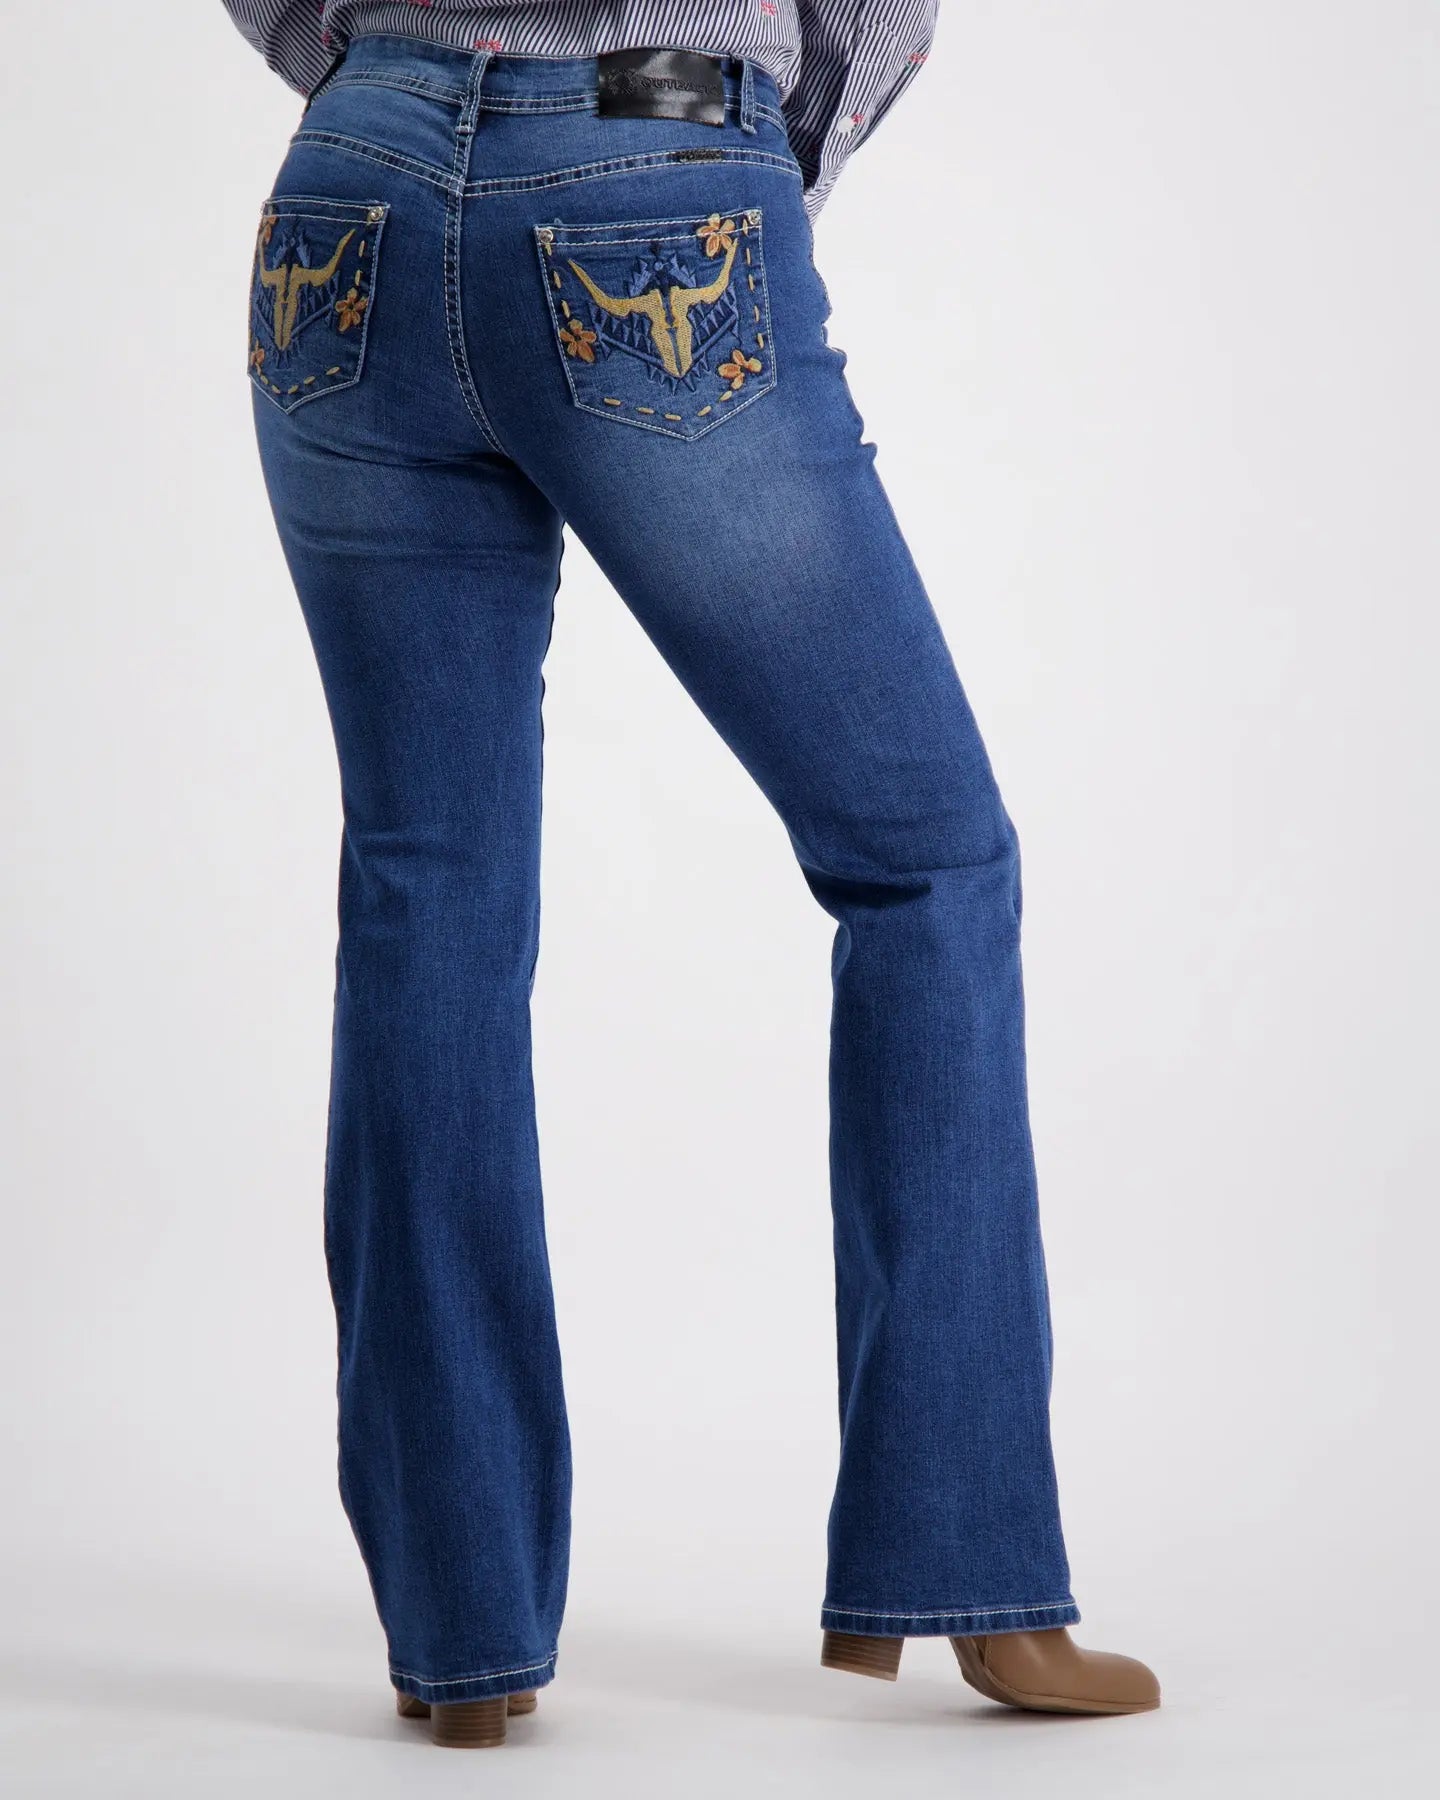 Montana Boot-Cut Jeans Outback Supply Co